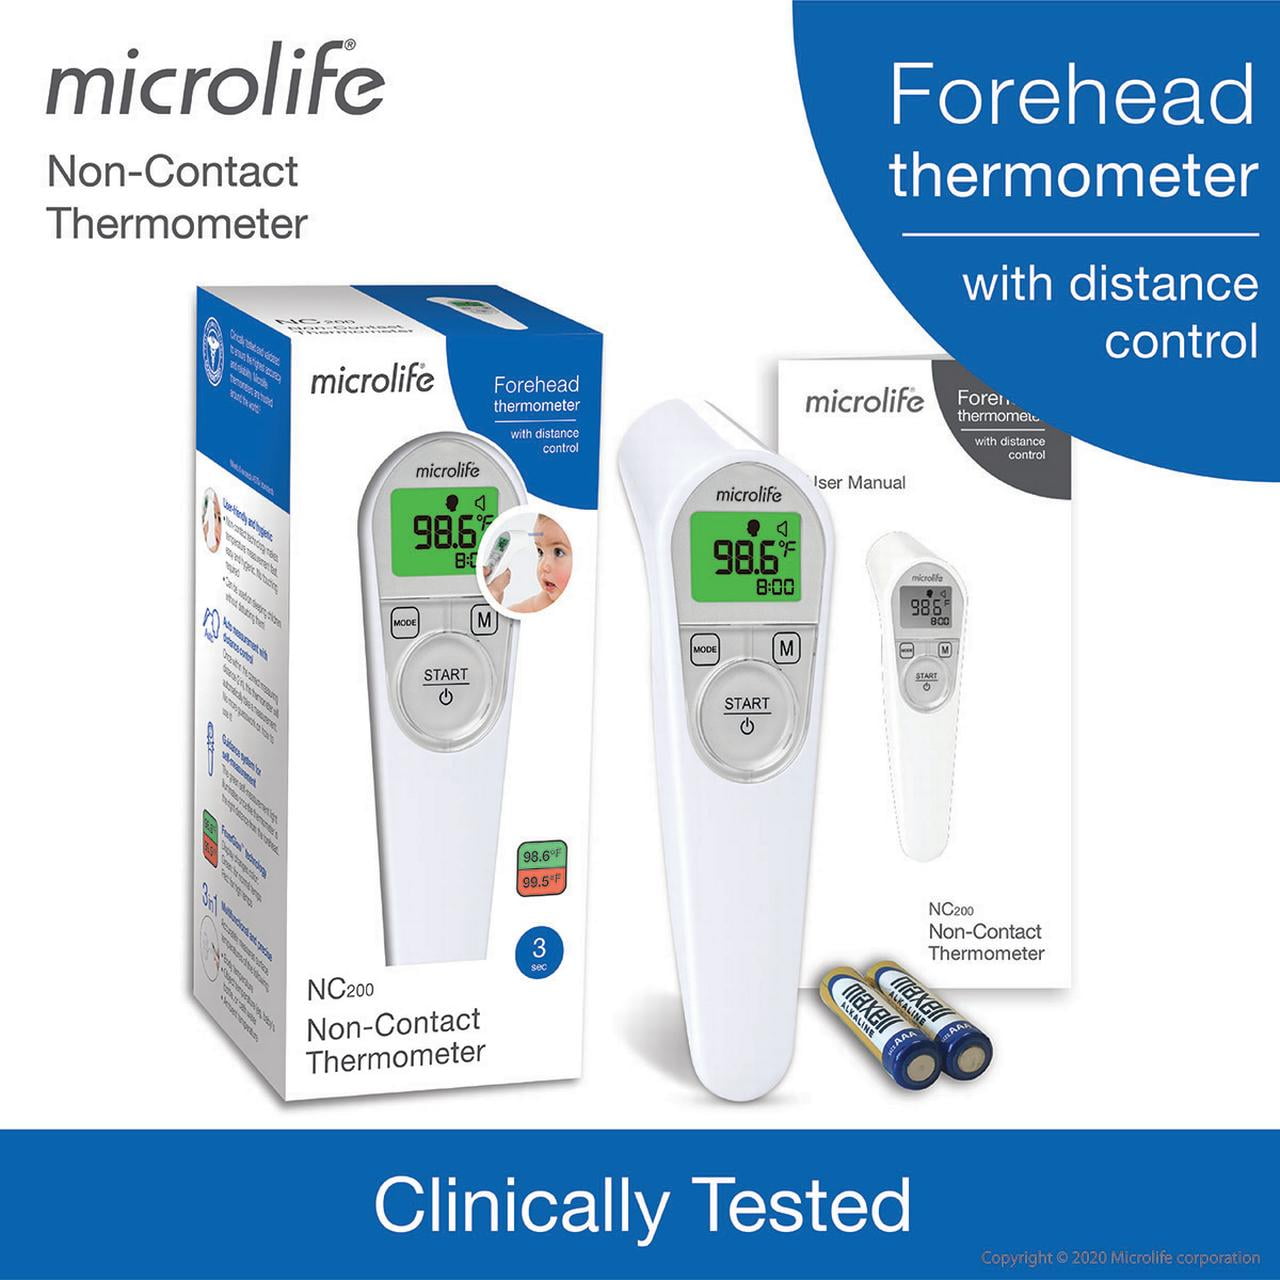 Microlife Non-Contact Forehead Thermometer Walmart.com